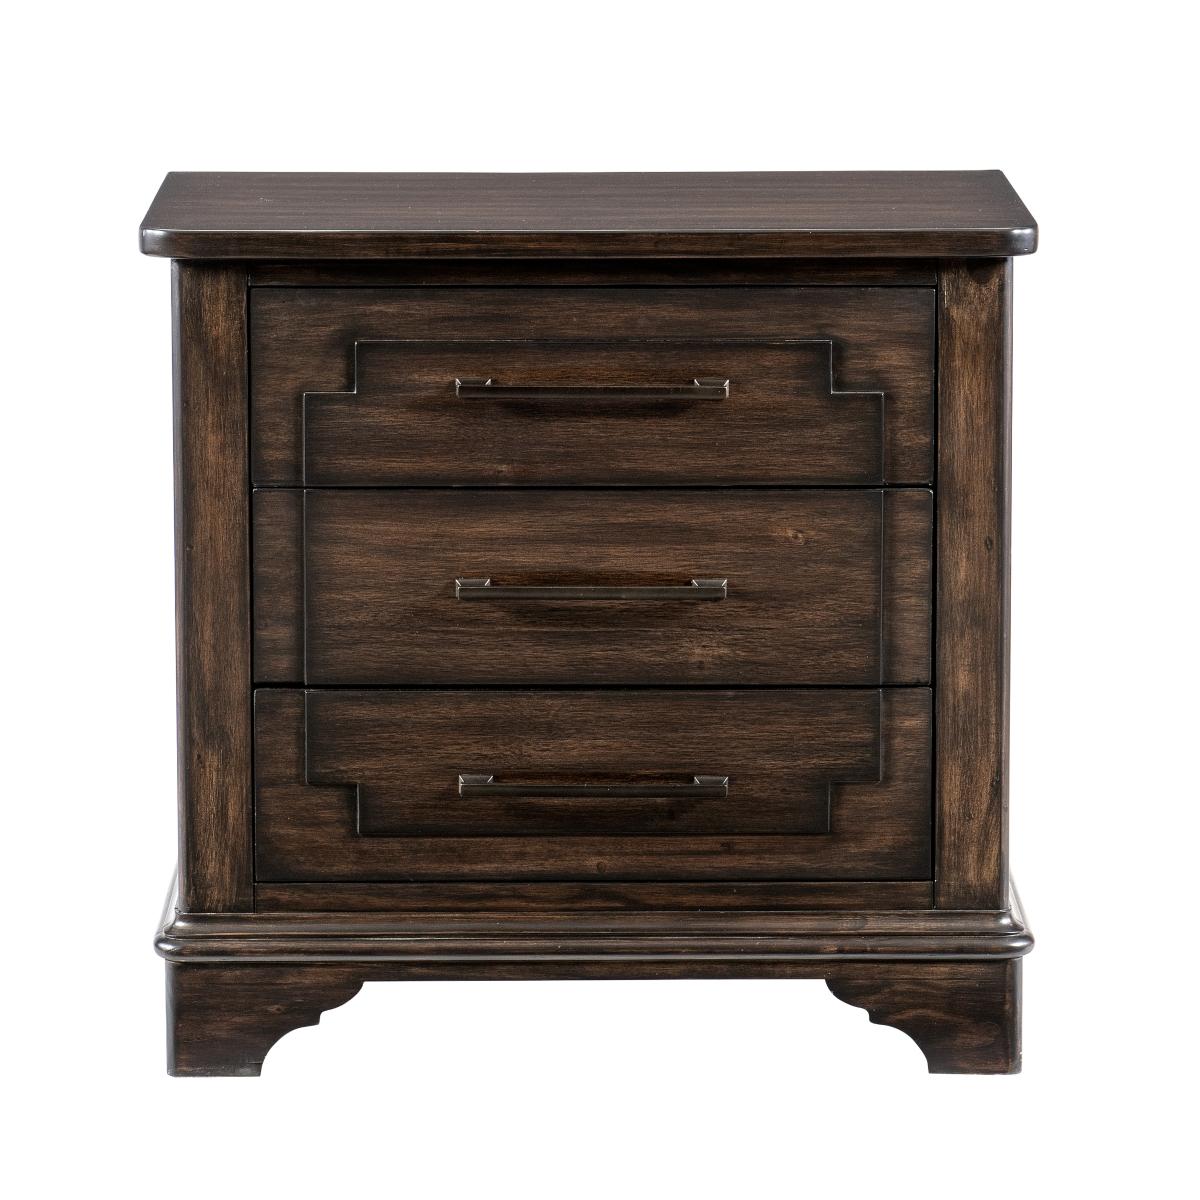 Traditional Nightstand 1406-4 1406-4 in Rustic Brown 